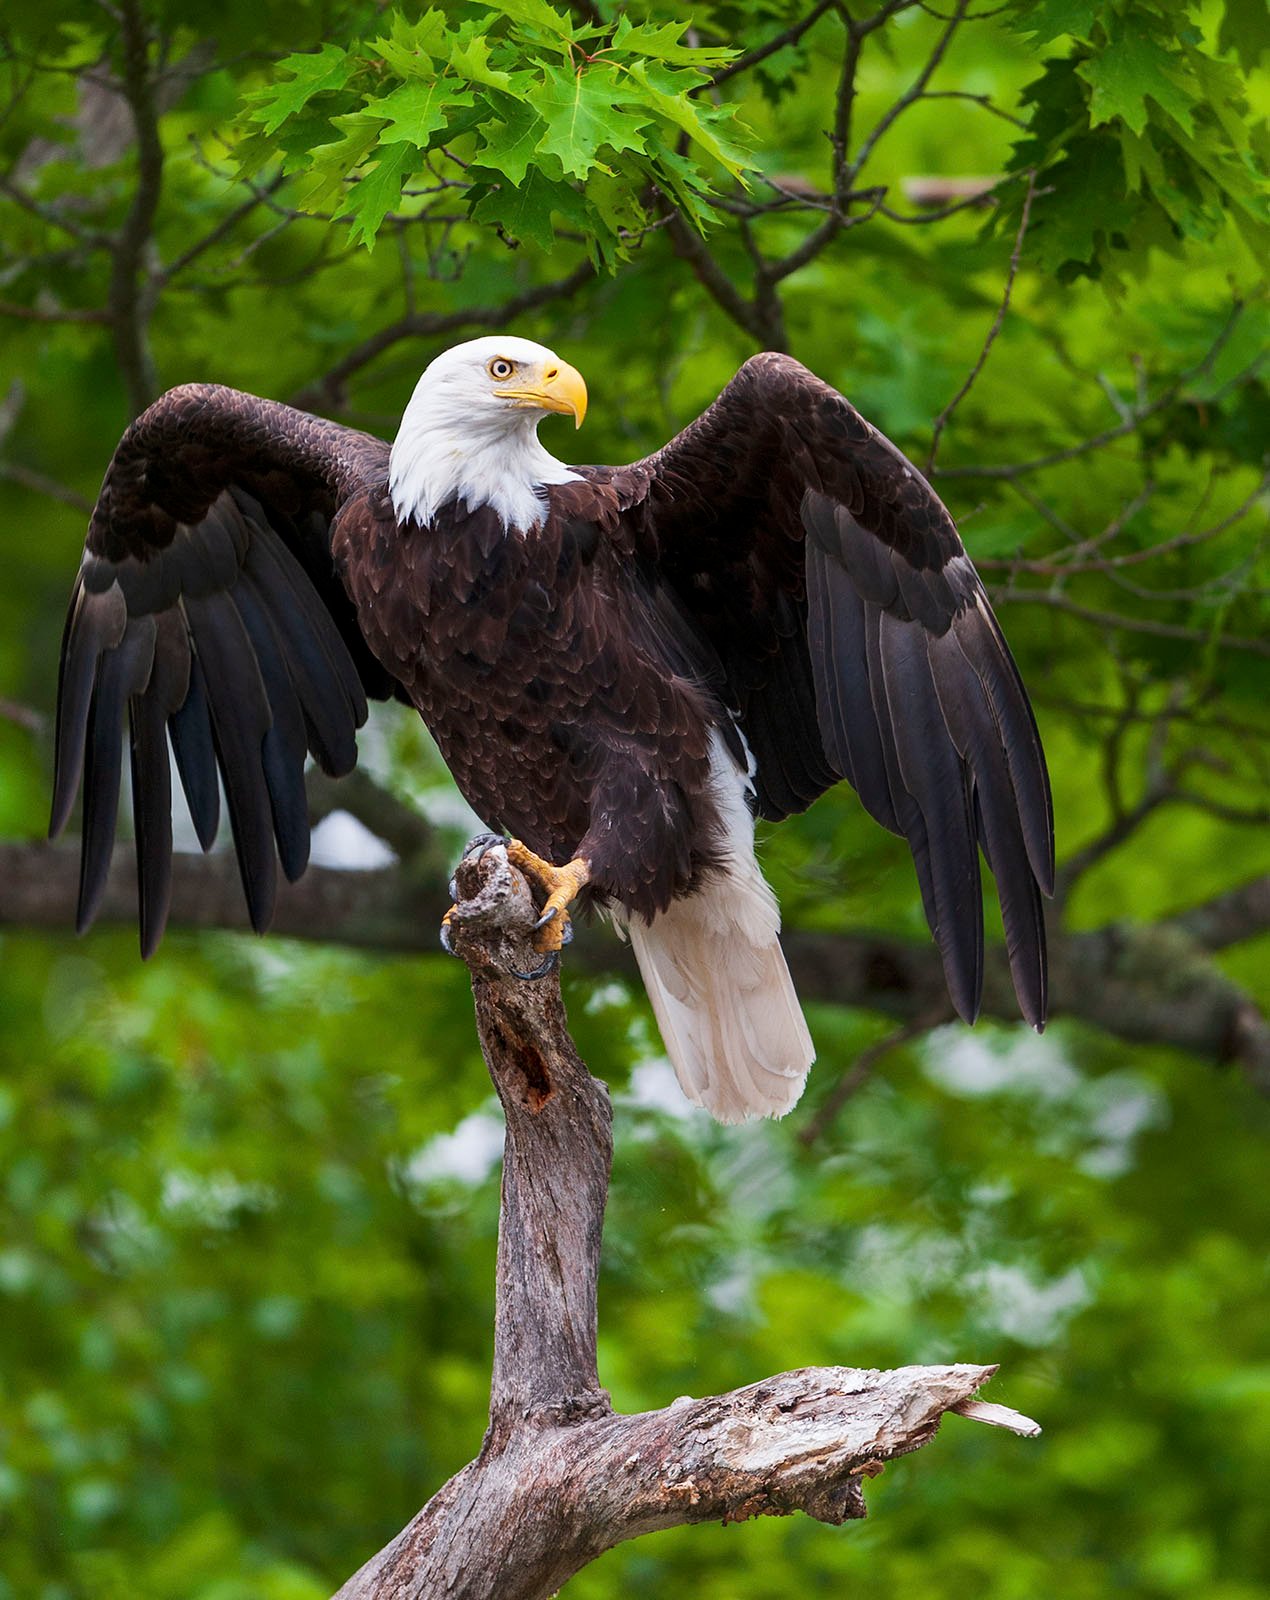 A majestic bald eagle perches atop a tree branch, spreading its striking wings, set against a backdrop of lush green foliage.